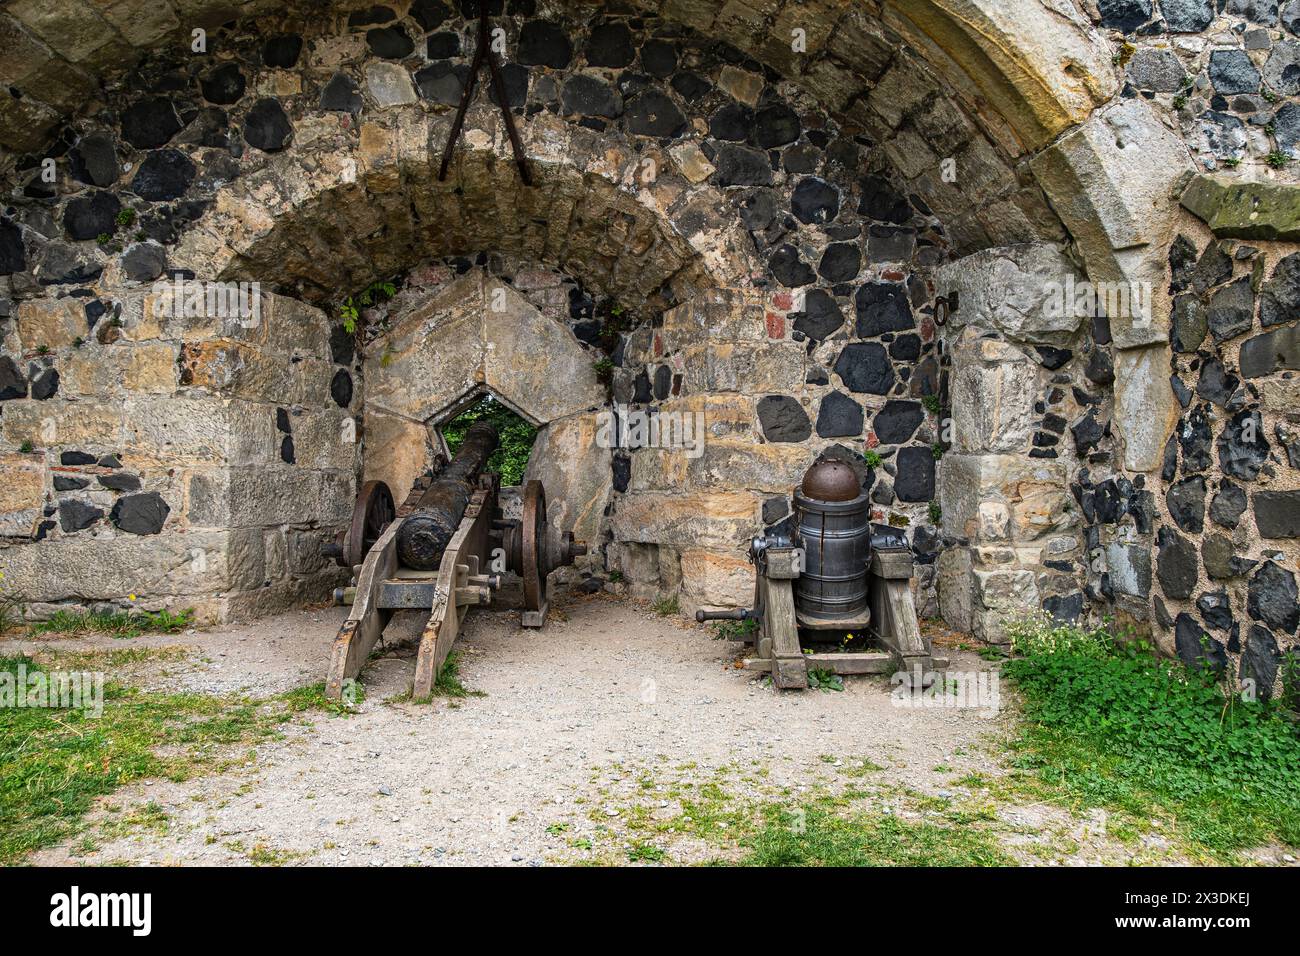 Historical artillery at the fortification wall of Stolpen Castle on the basalt hill of Stolpen, Saxony, Germany, for editorial use only. Stock Photo